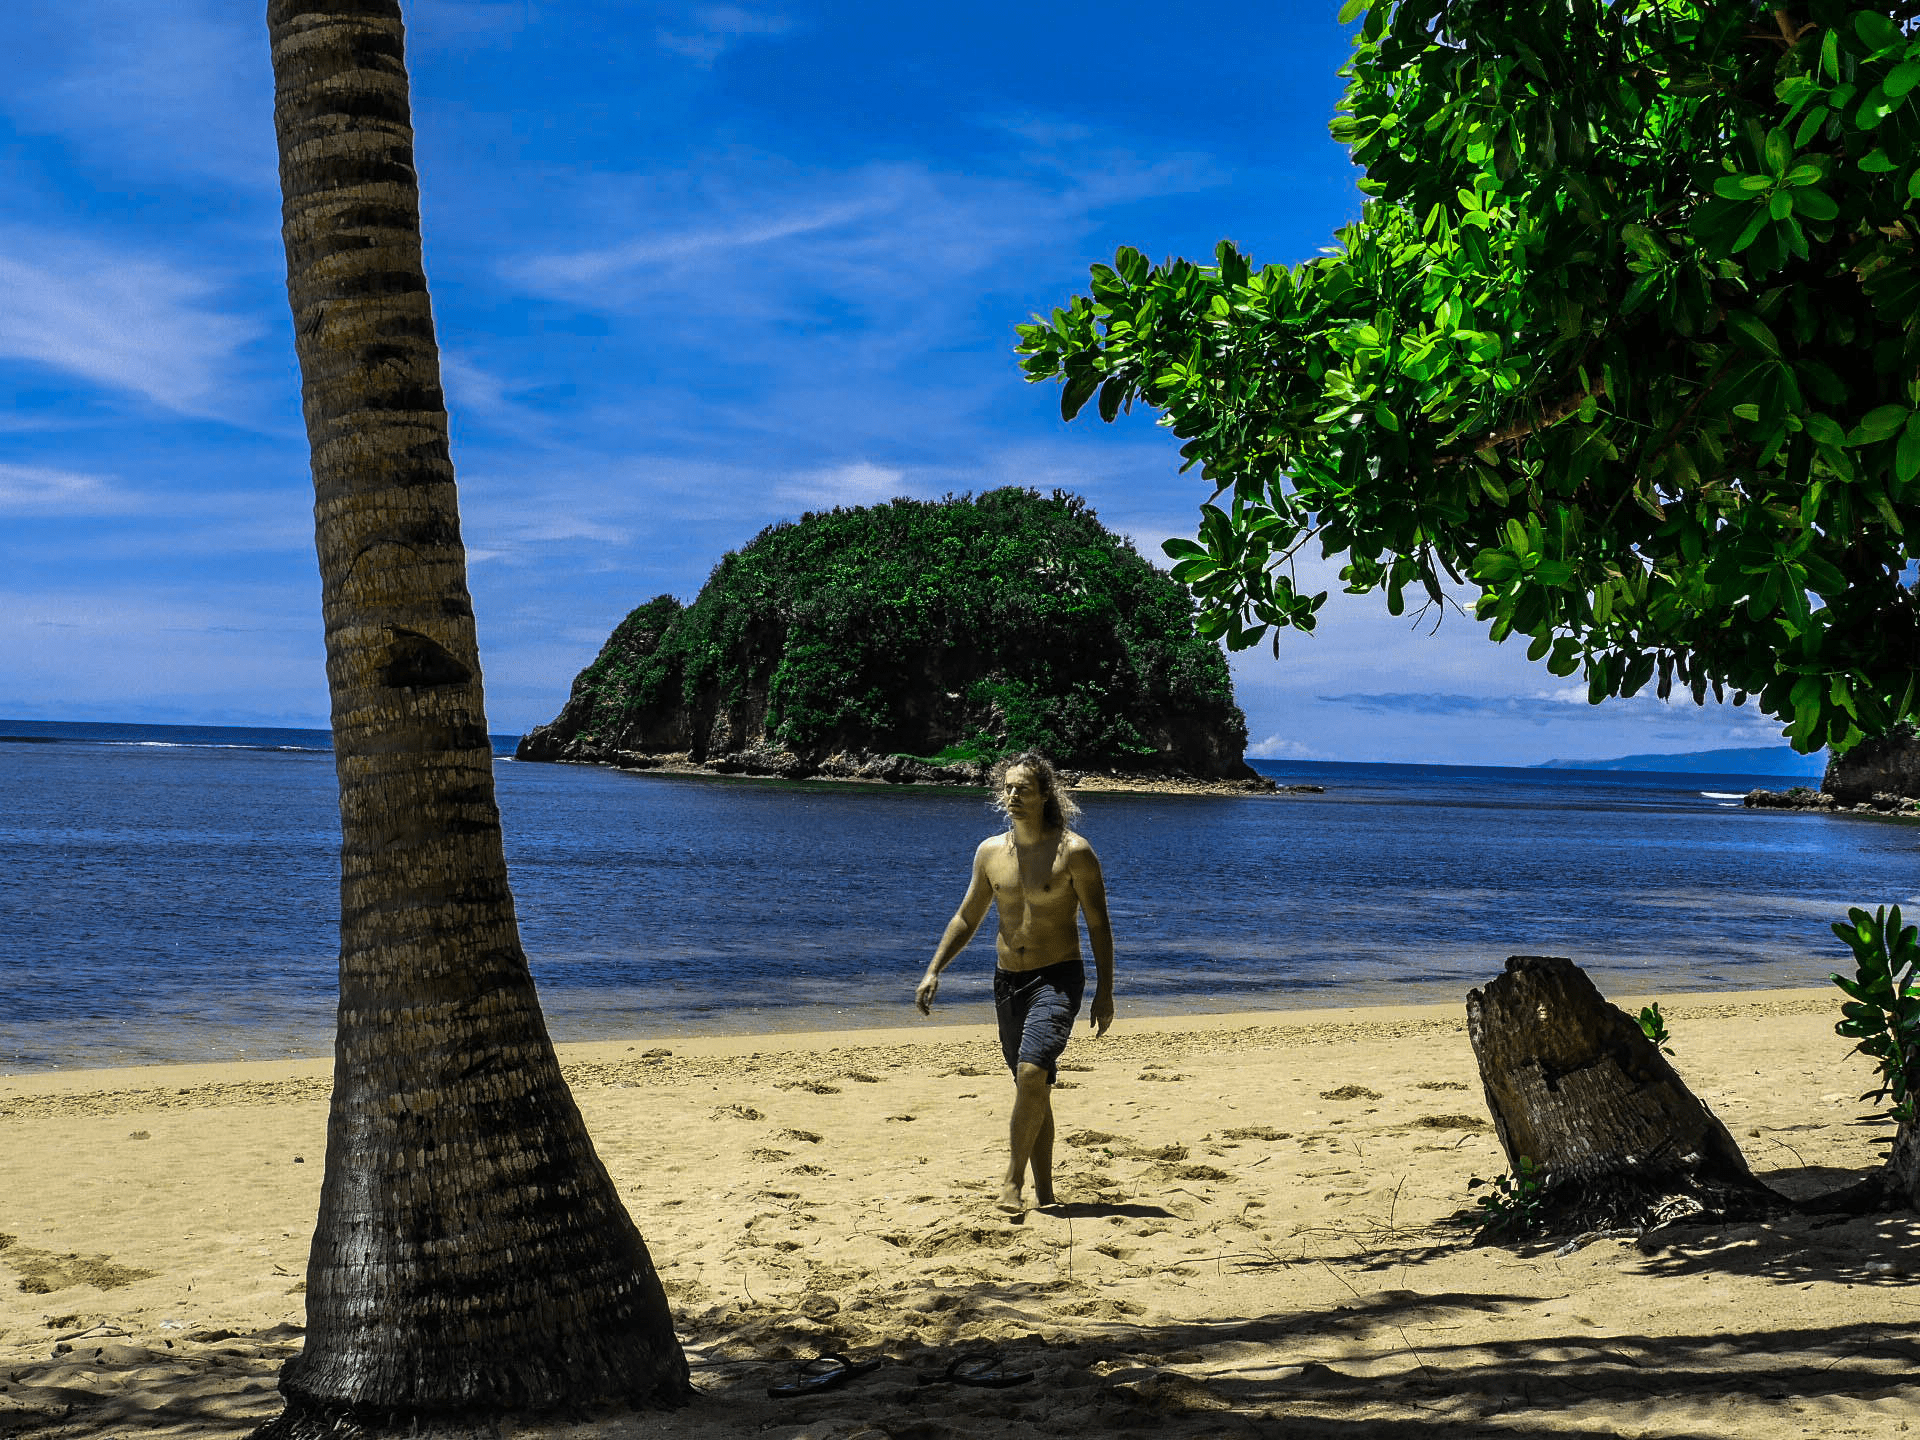 lenny through paradise walking over twin rock beach in catanduanes philippines